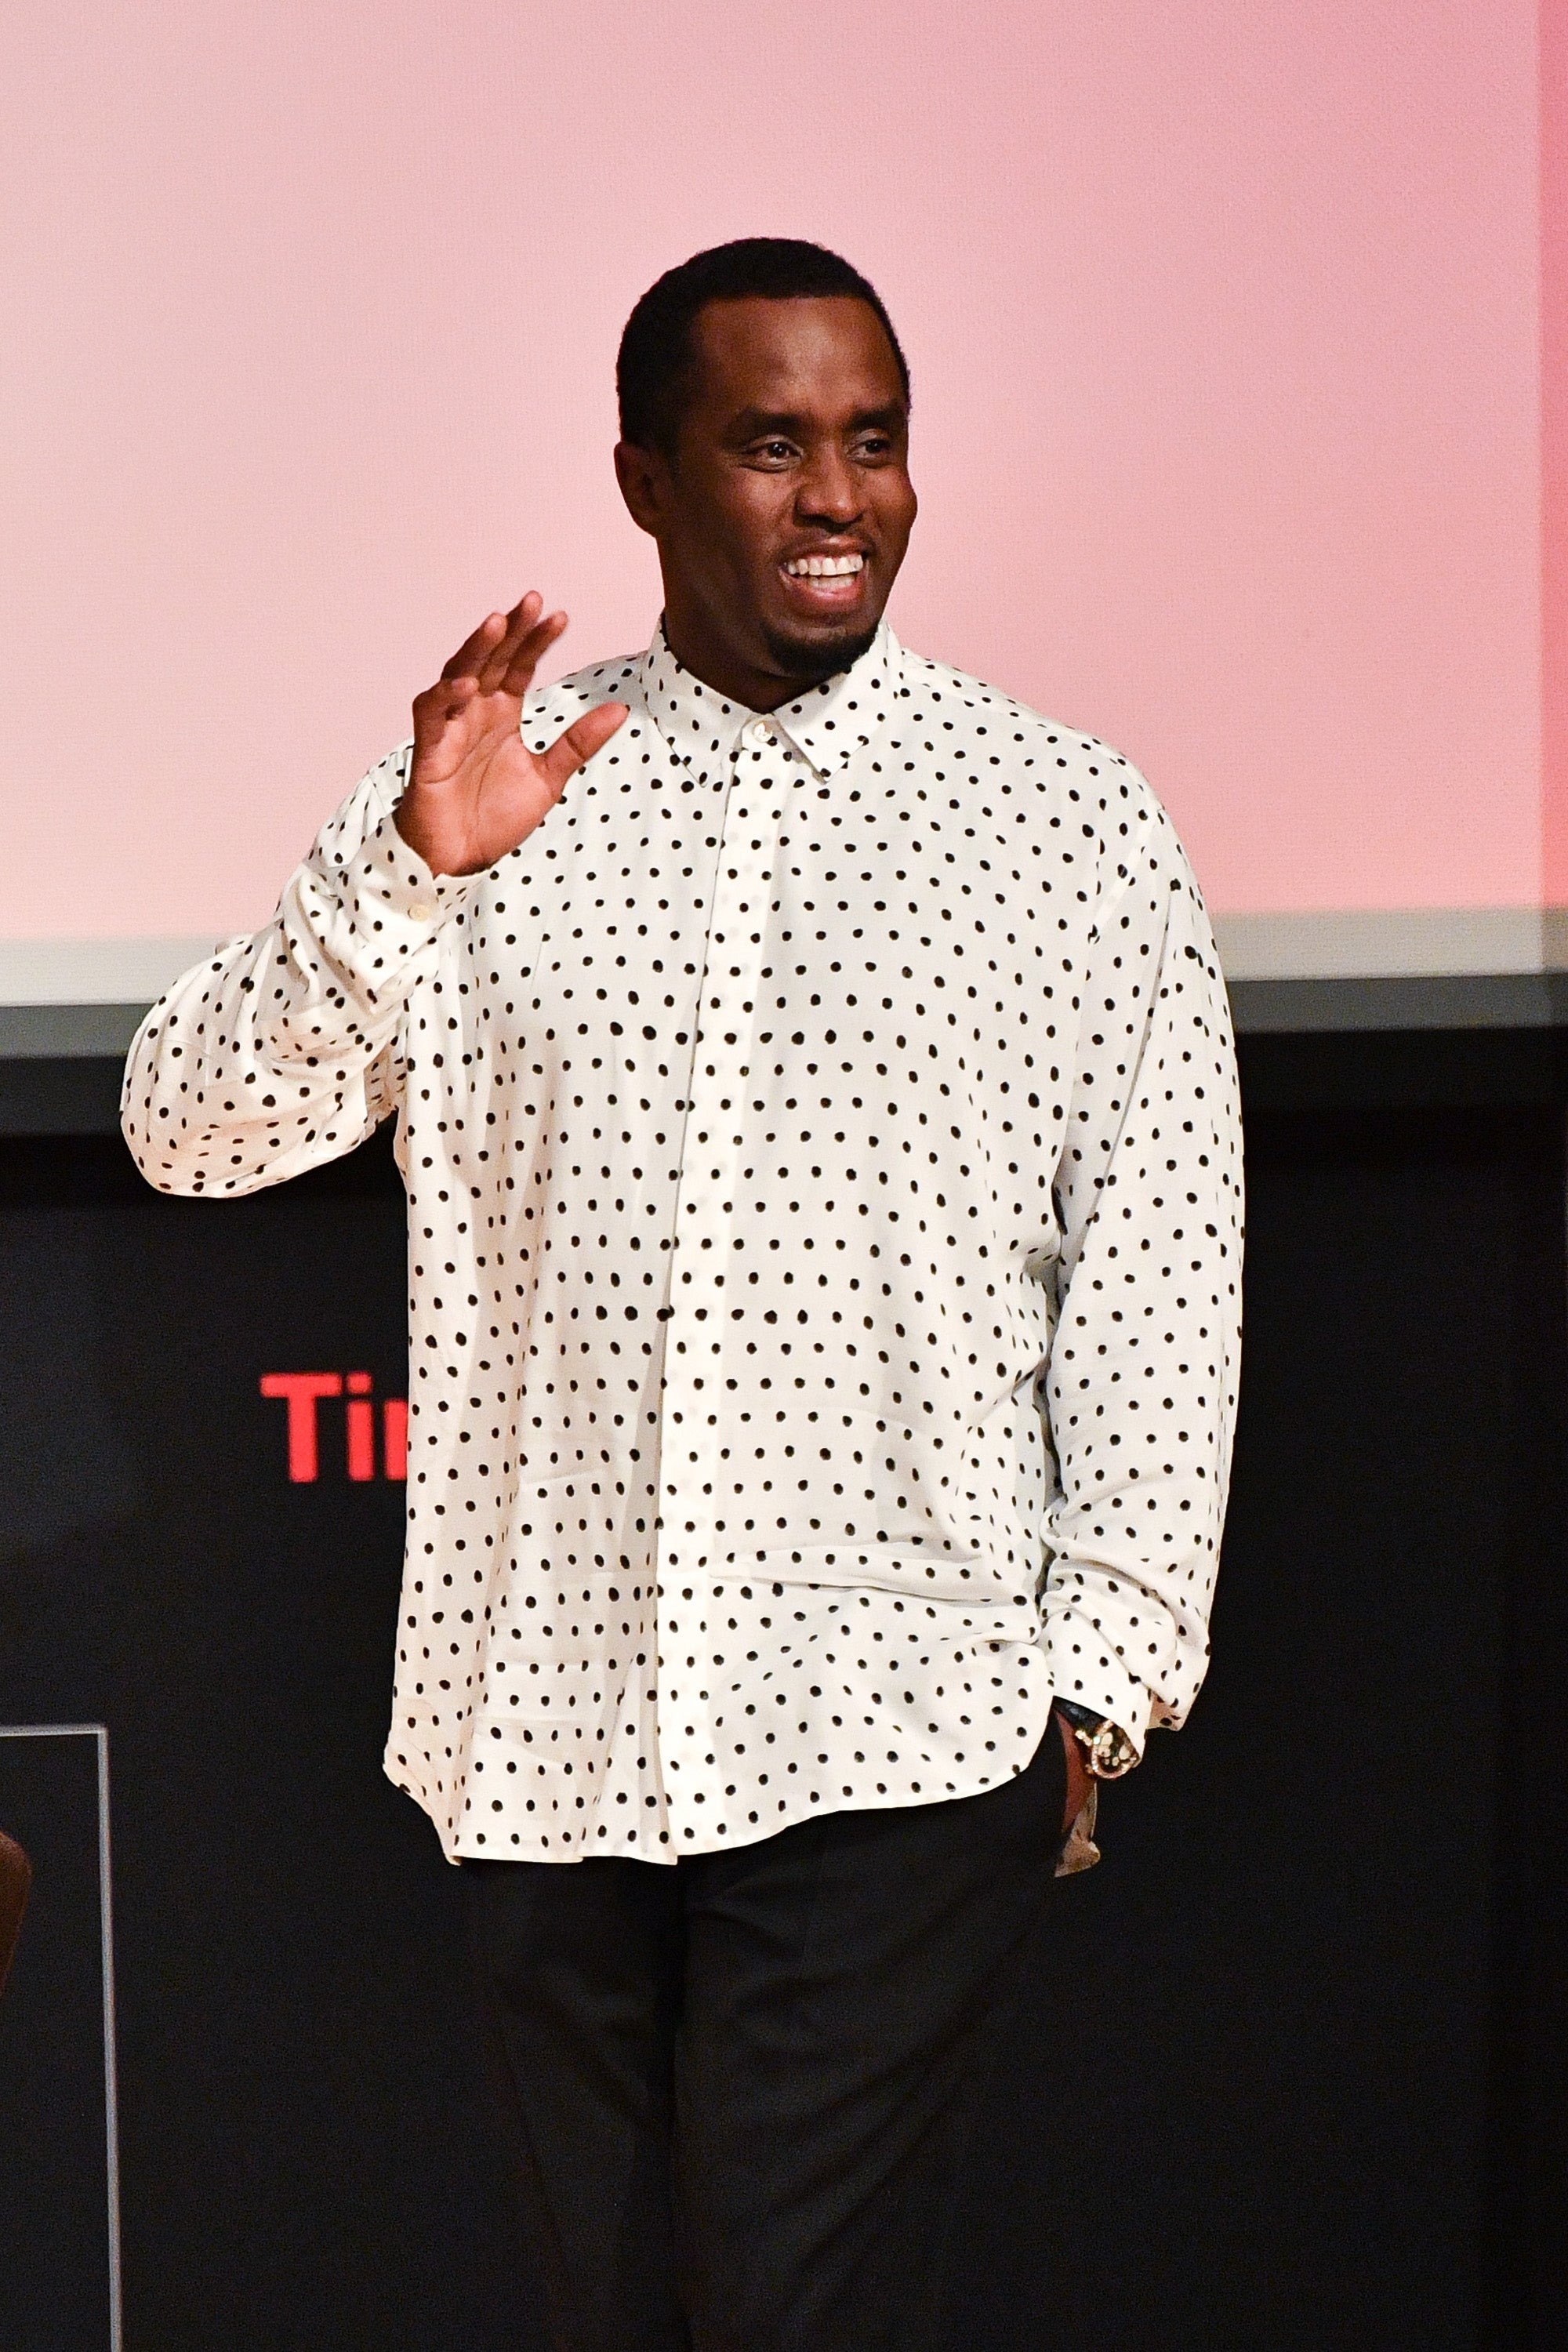 Diddy Wants To Purchase The NFL So Players Can 'Protest For Your People'
